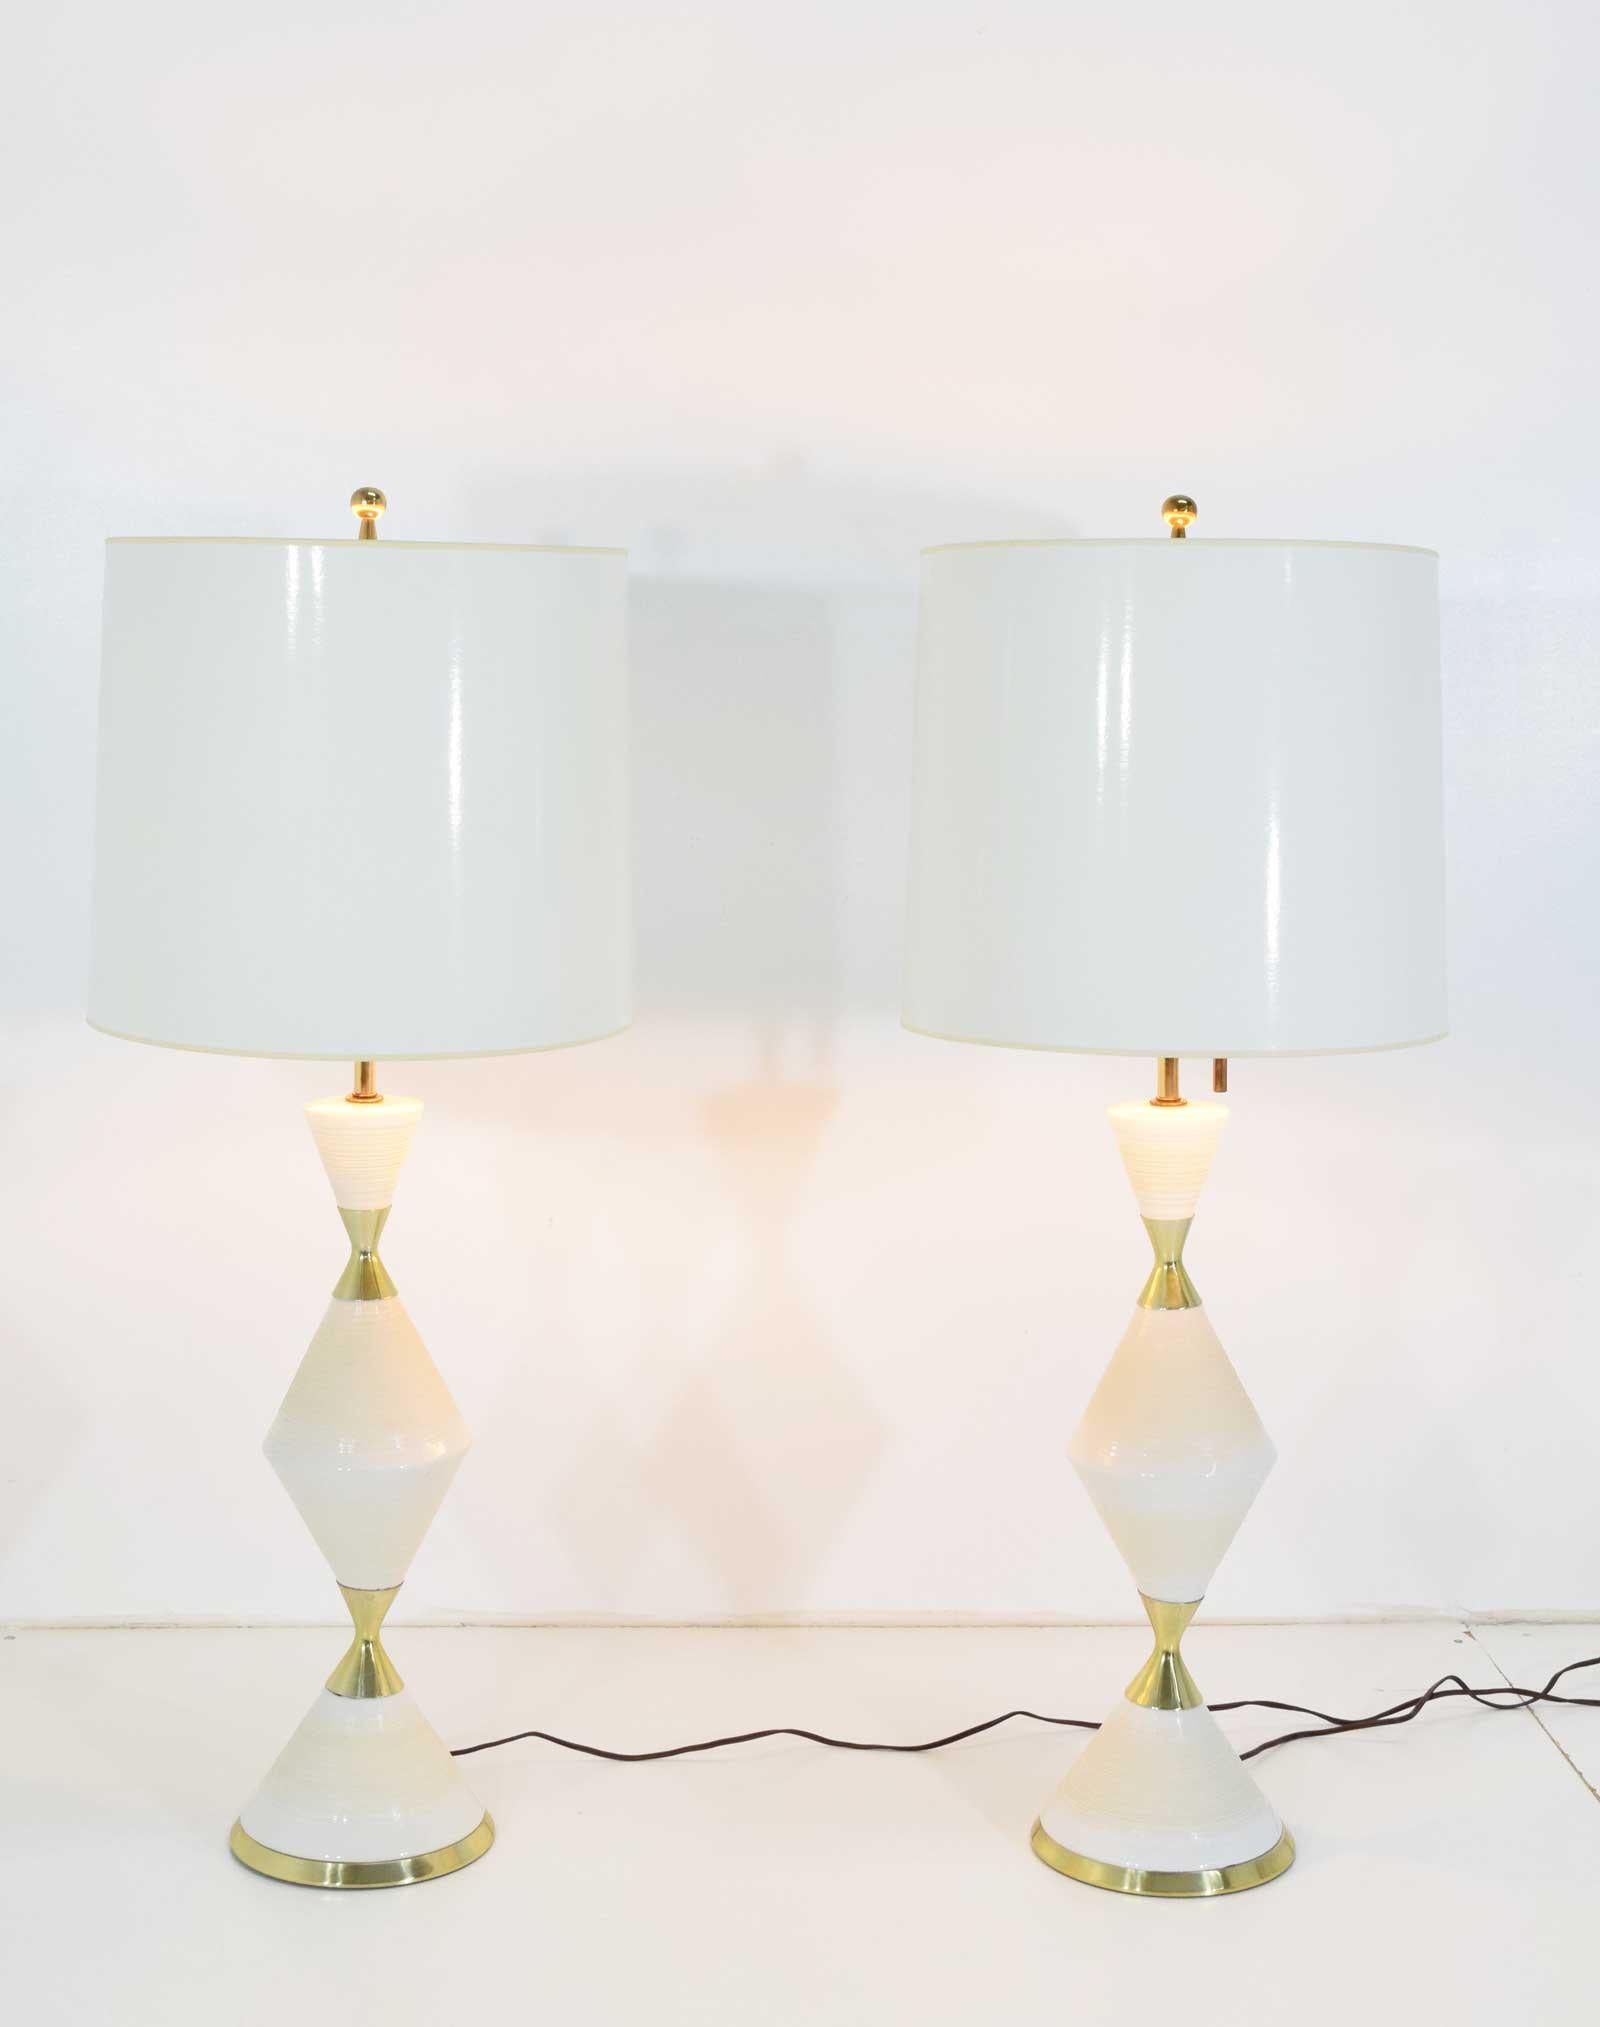 A stunning pair of vintage porcelain lamps by Gerald Thurston for Lightolier. Each lamp features brass fittings and three bulb fixture. We added the shades but you can change to your choice. 

Measurements exclude the shades.